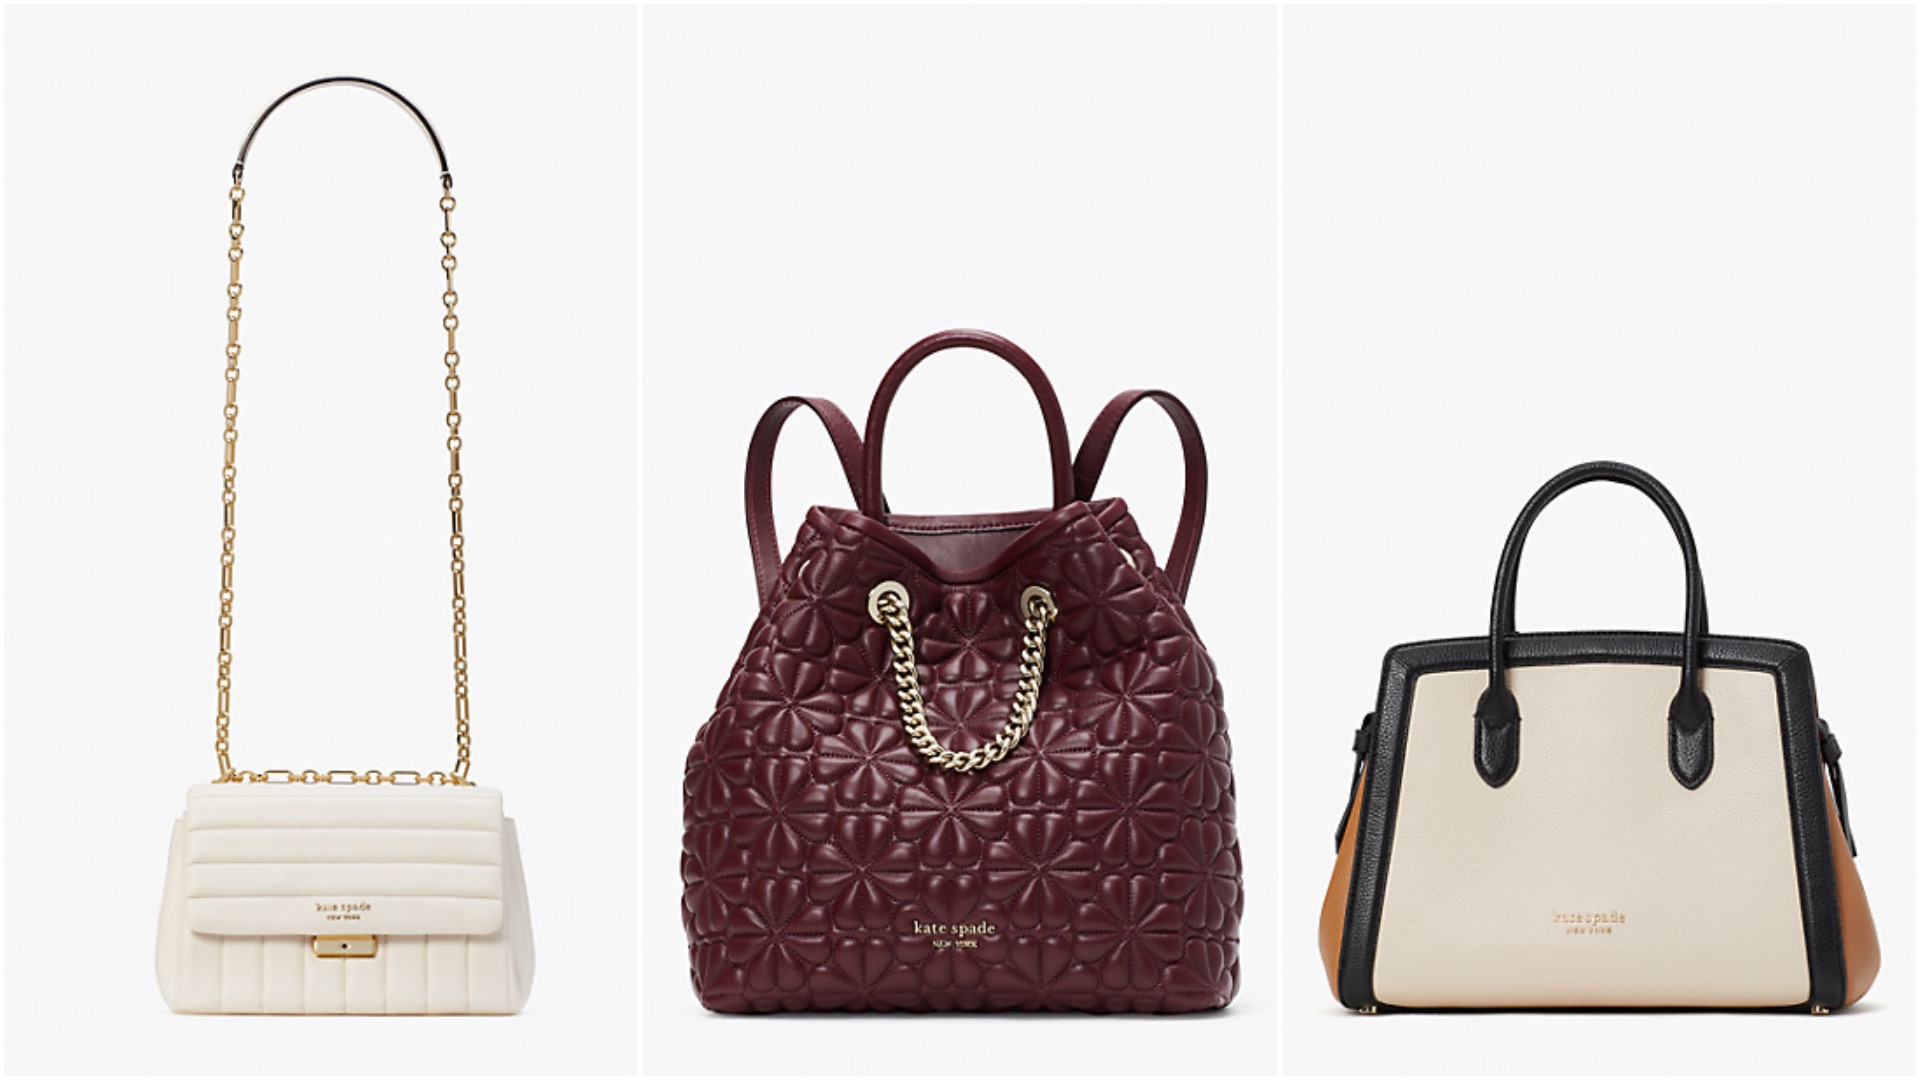 Kate Spade has added new items to its online clearance section 